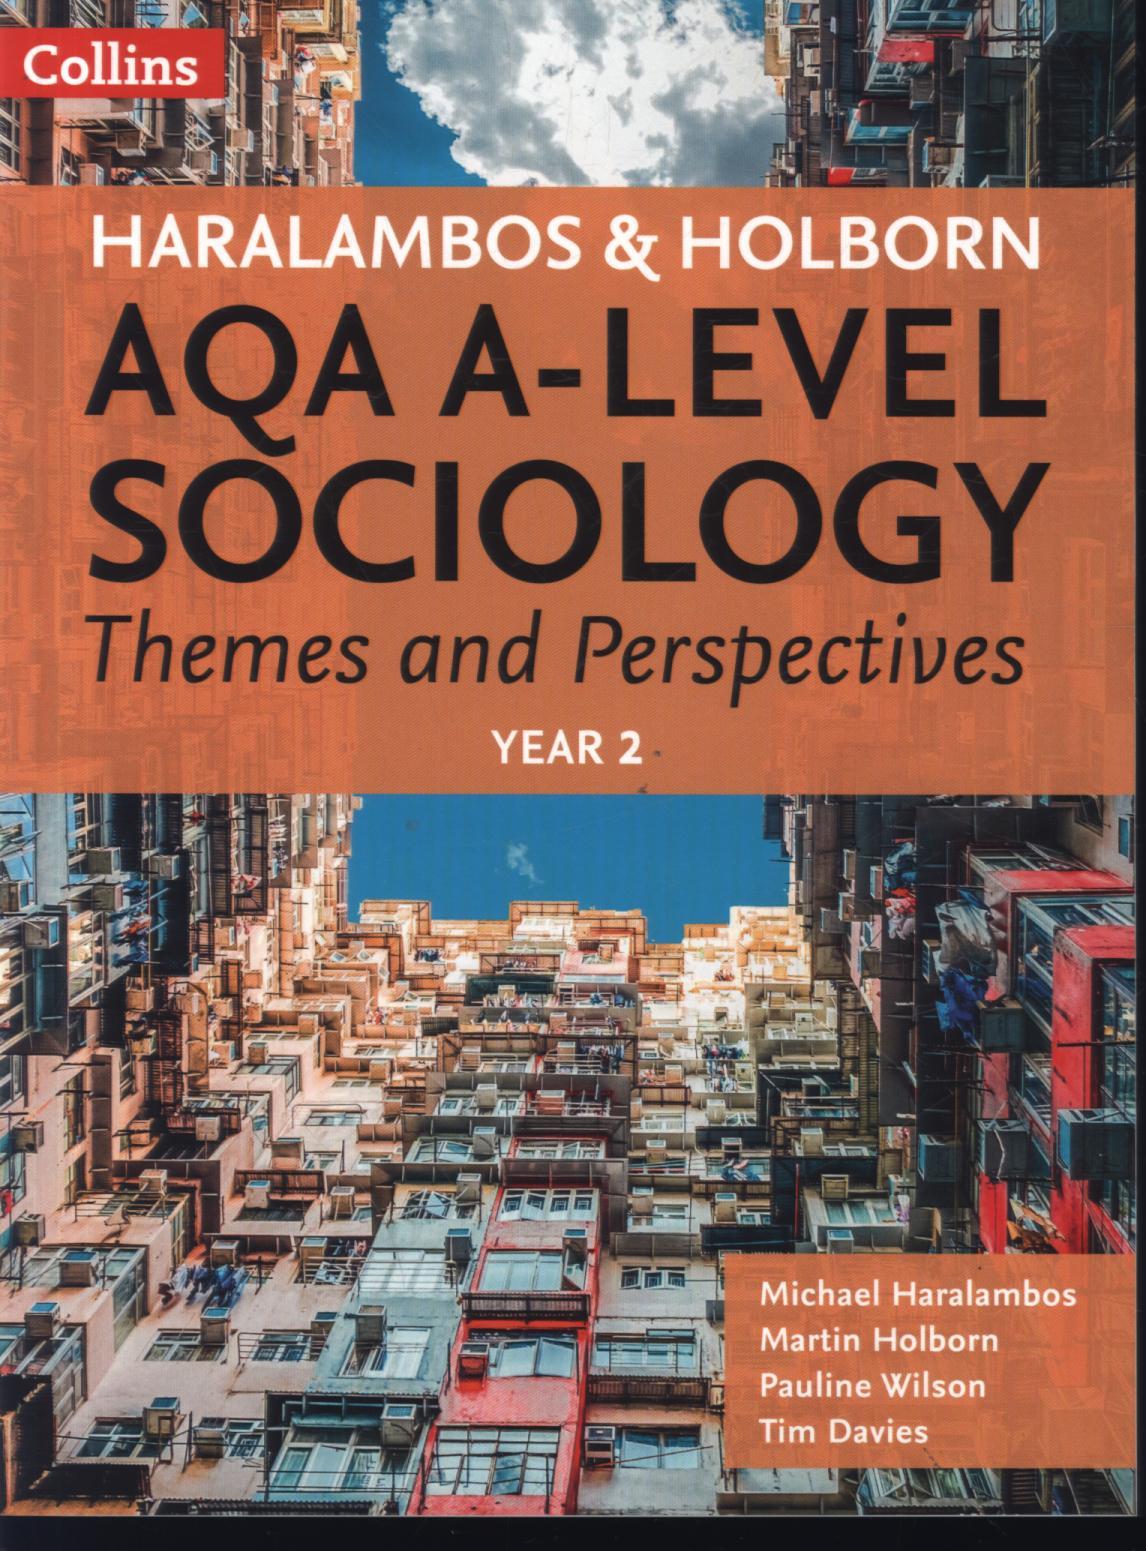 AQA A-level Sociology Themes and Perspectives